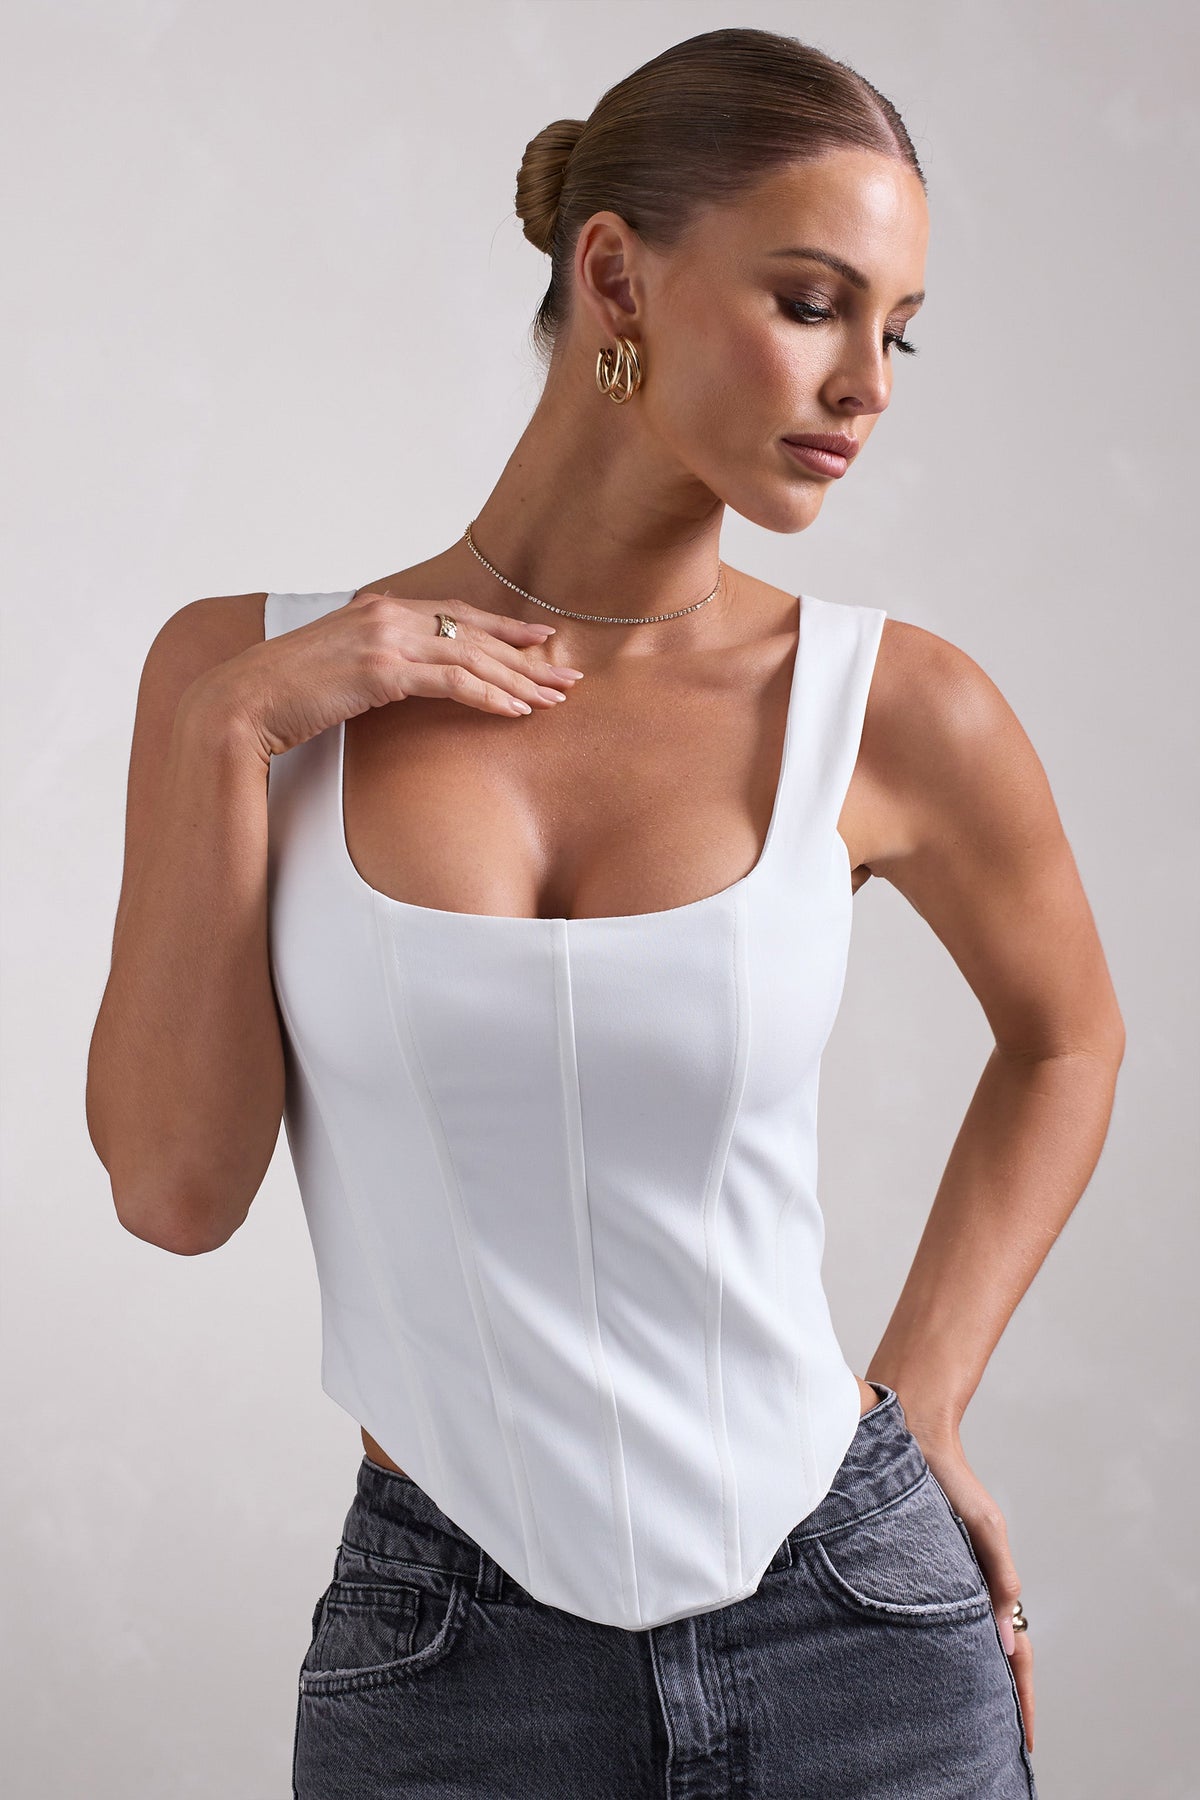 MESHED UP CORSET TOP - Tall and Thick Fashions